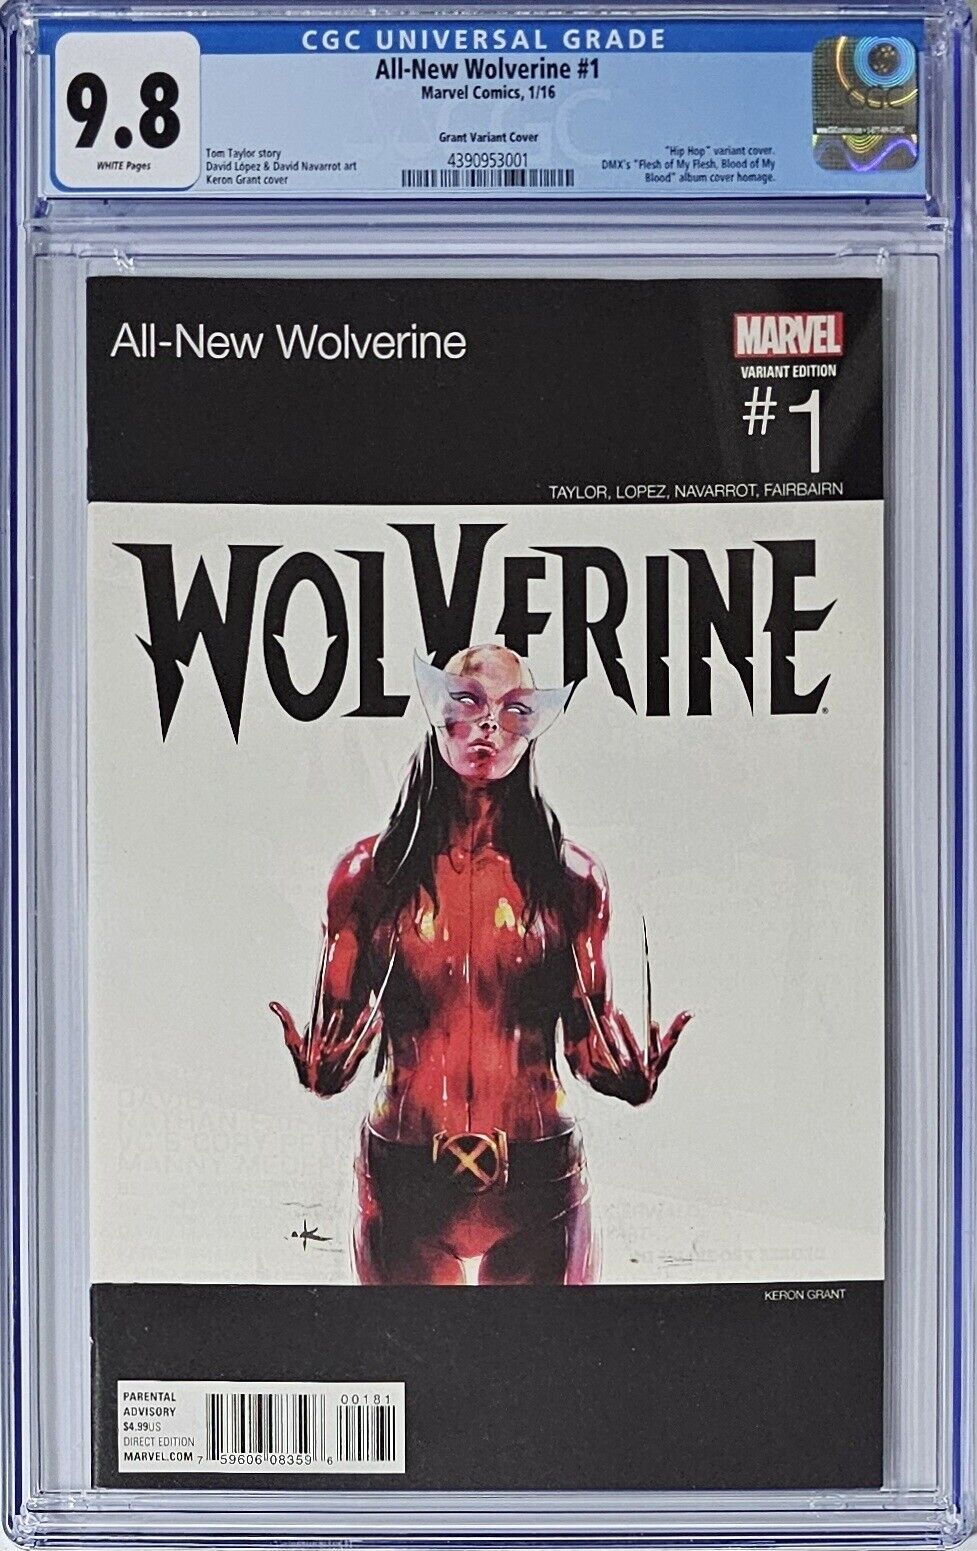 All-New Wolverine #1 CGC 9.8 Marvel Comics 2016 Grant Hip Hop Variant Cover